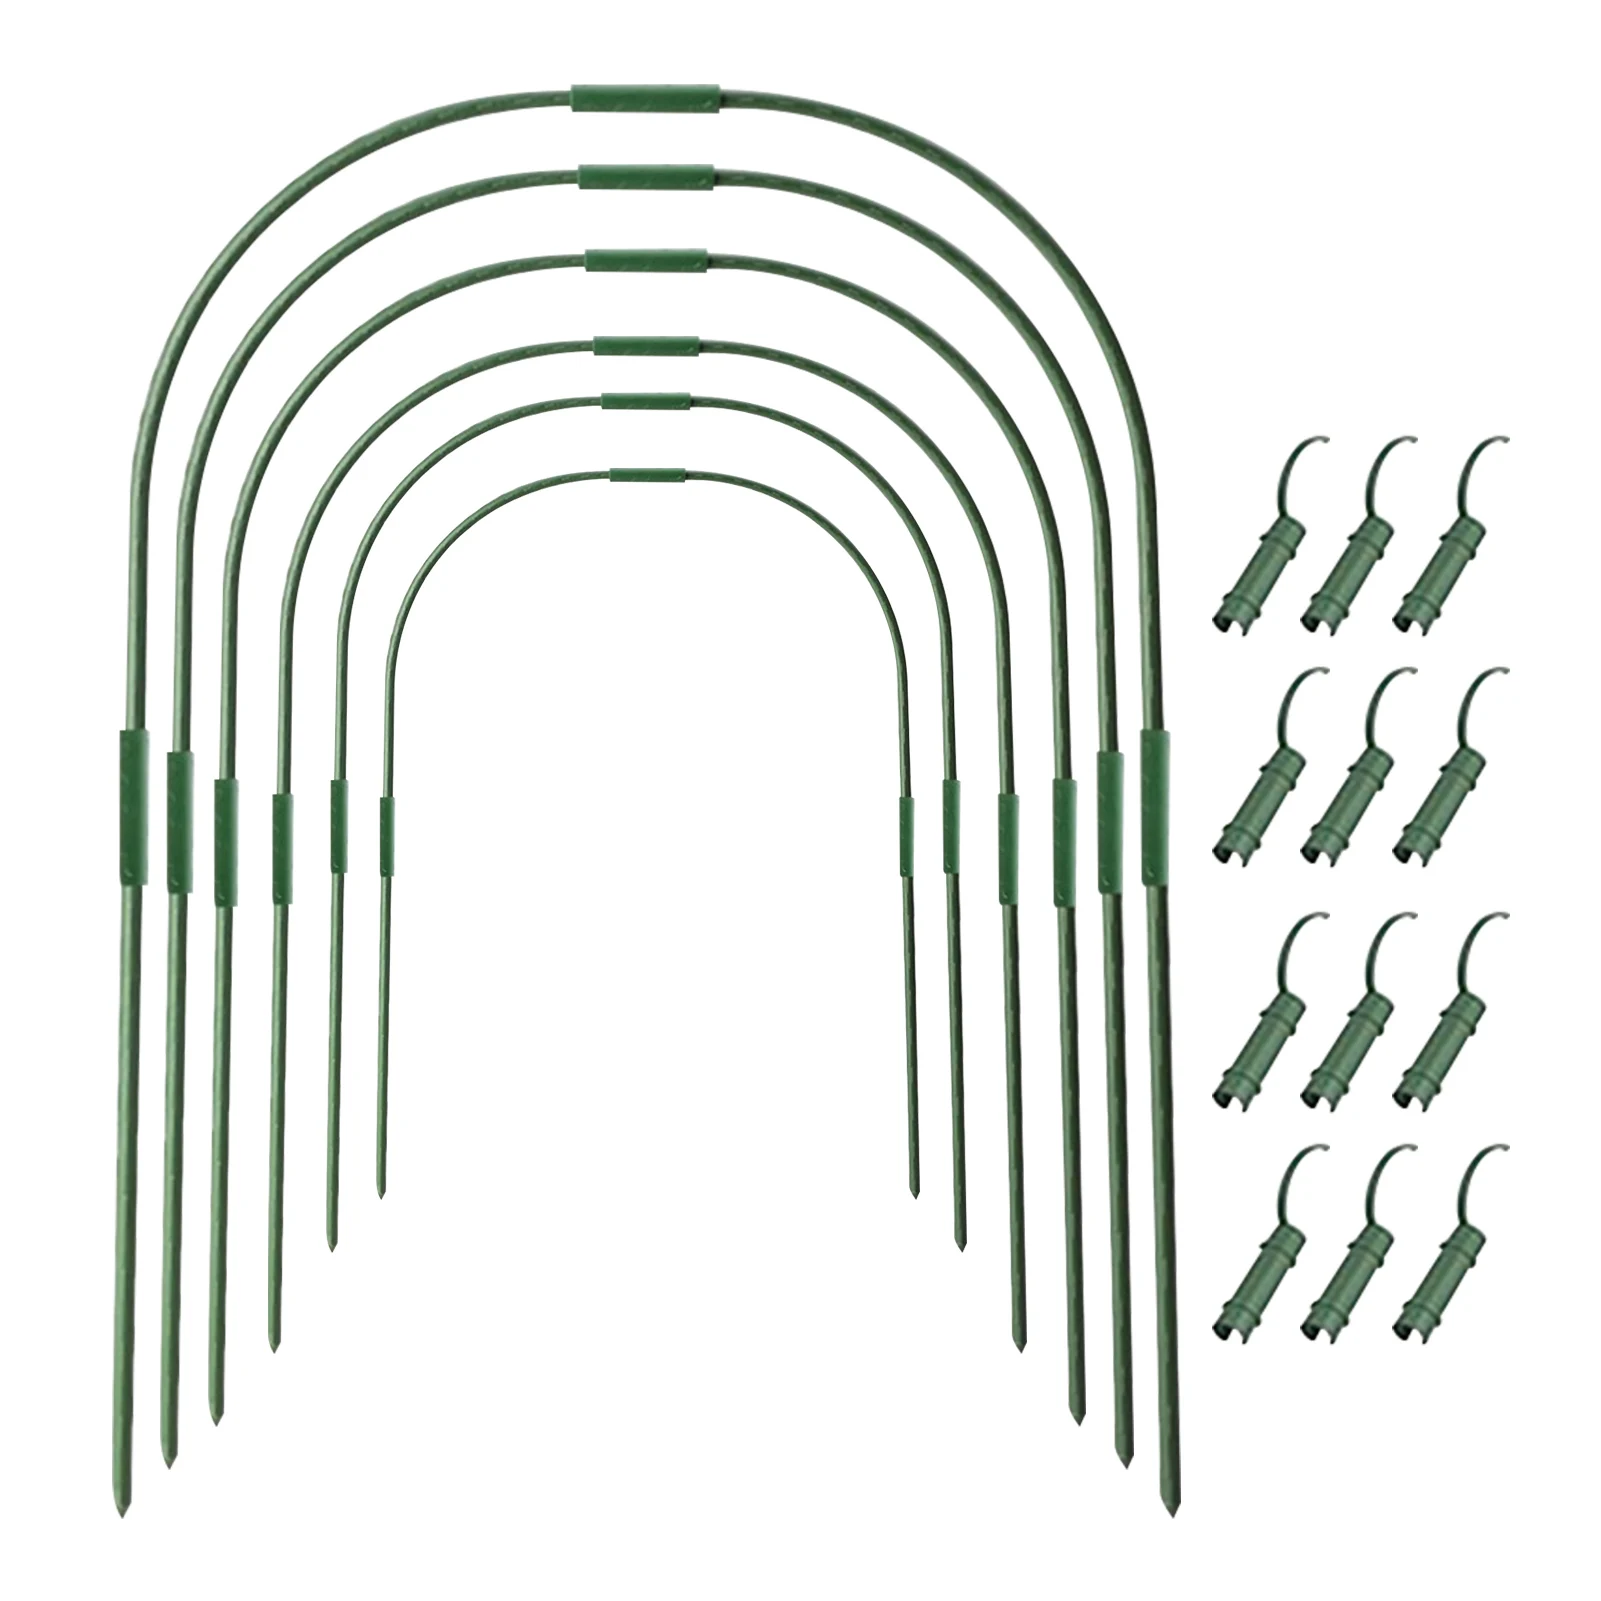 

54pcs Vegetable Row Cover Clip Connector Tunnel Greenhouse Hoop Set Frame Growing Sturdy Stakes Plant Support Protective DIY